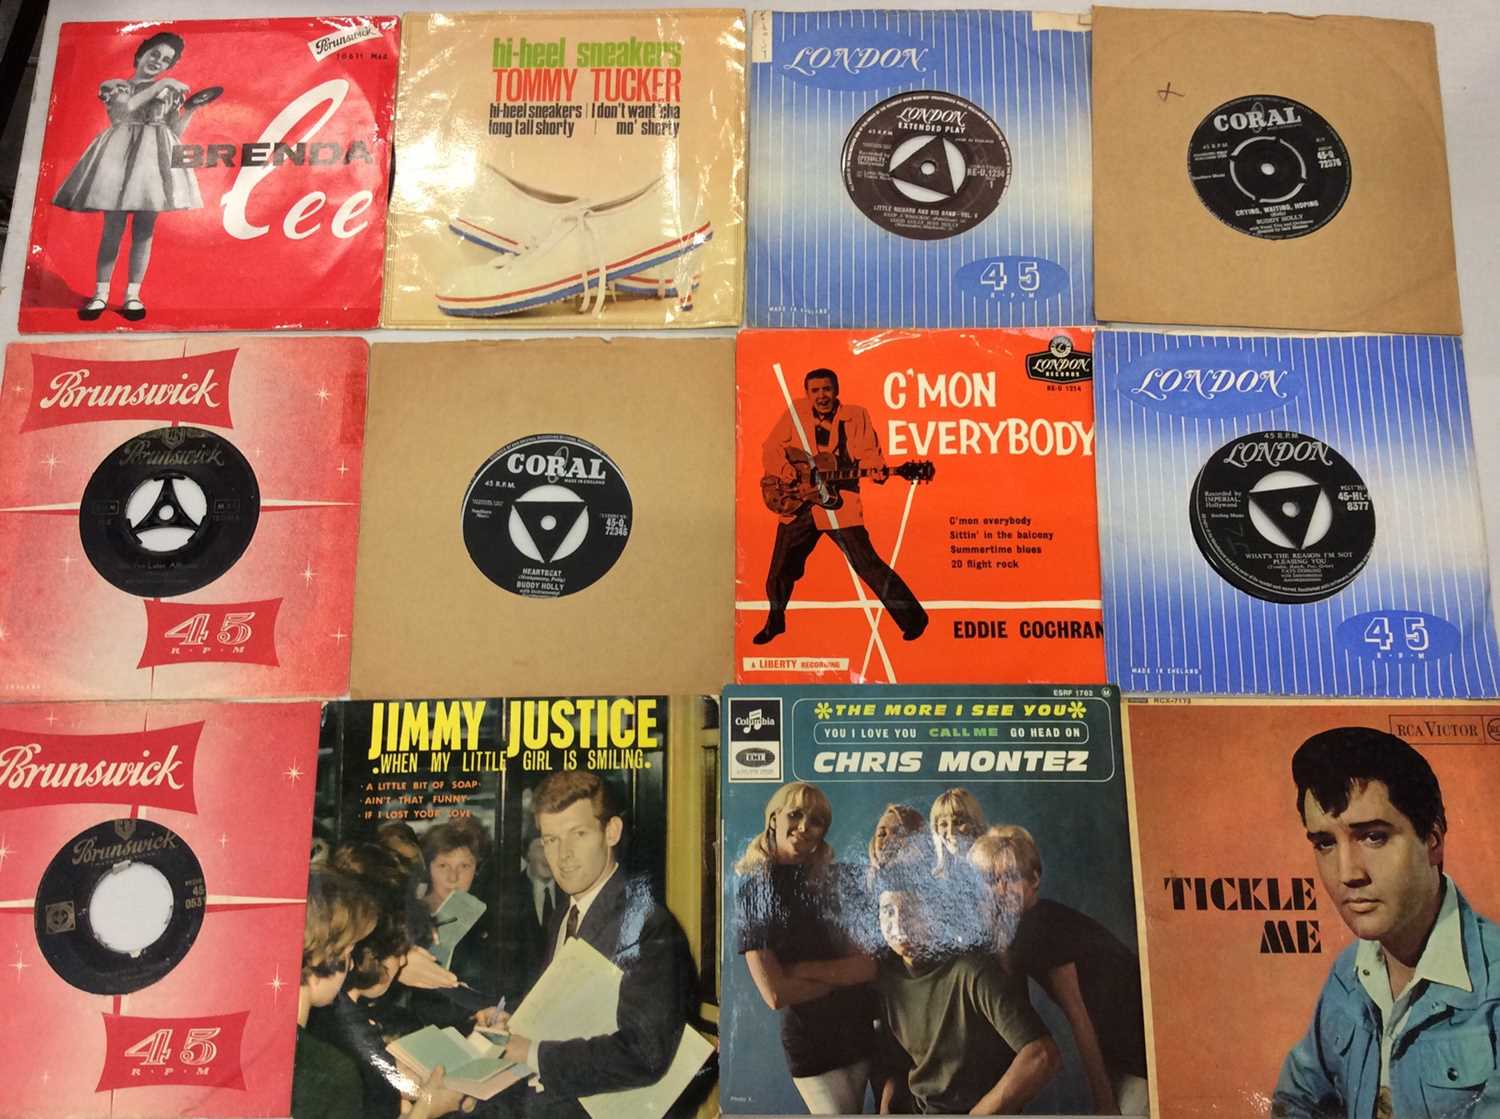 Carrying case of single records and EP's including Tommy Tucker, Fats Domino, Buddy Holly, Casillacs